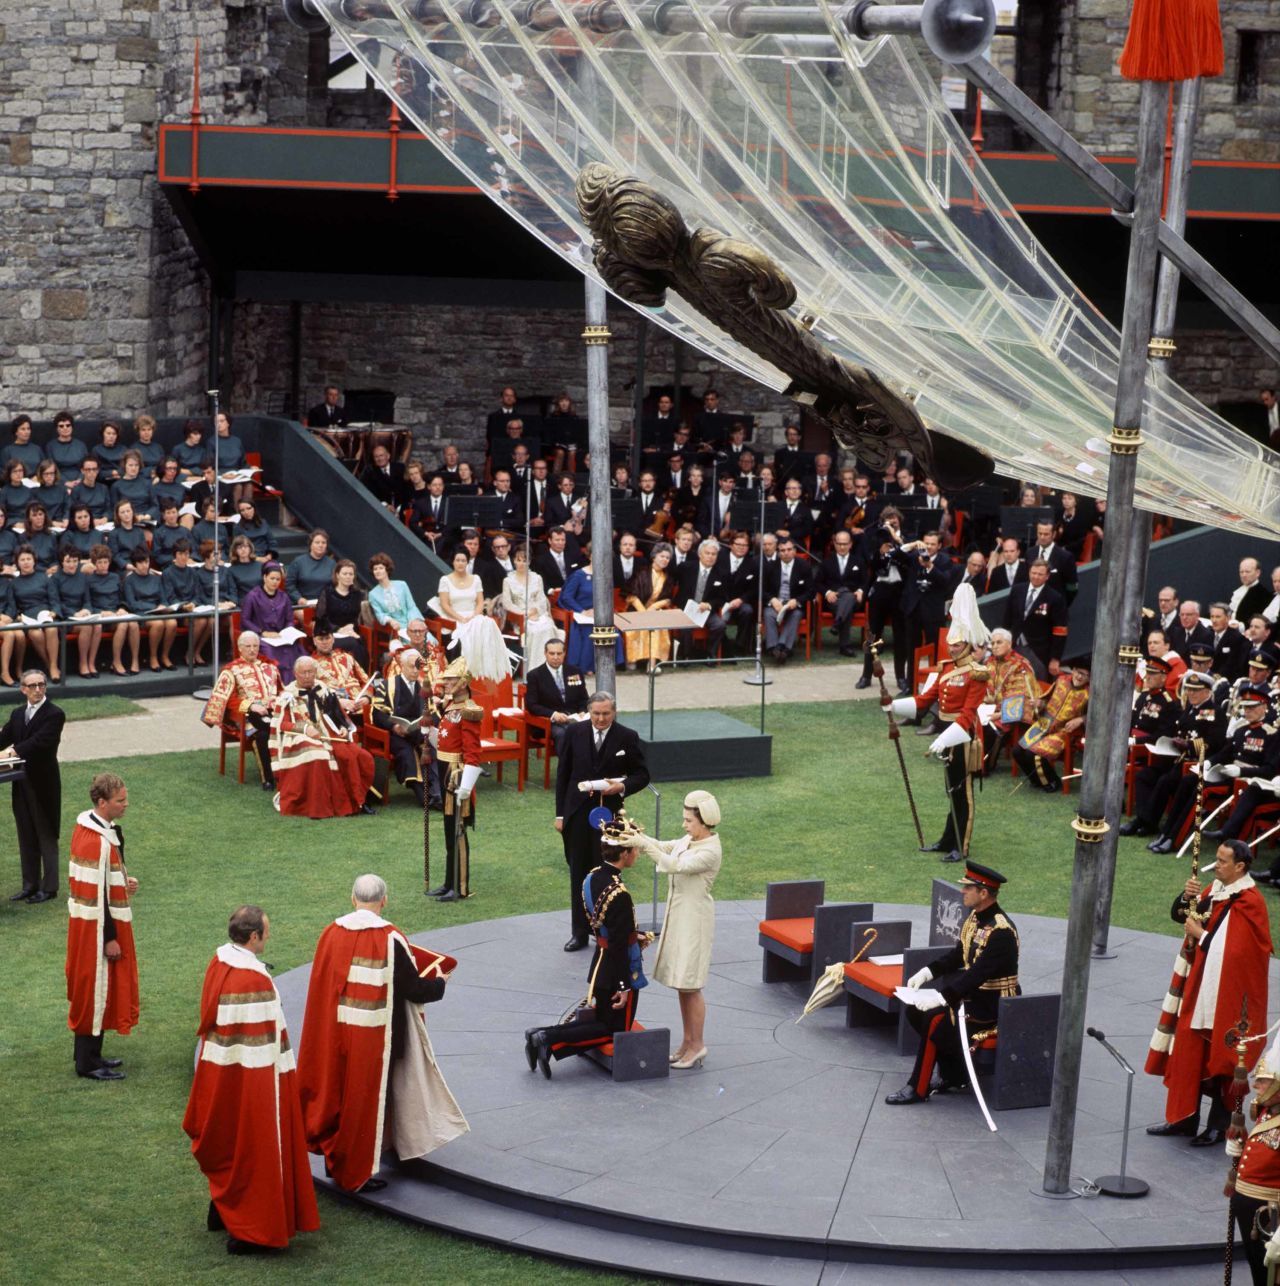 The investiture of Prince Charles as the Prince of Wales in 1969.